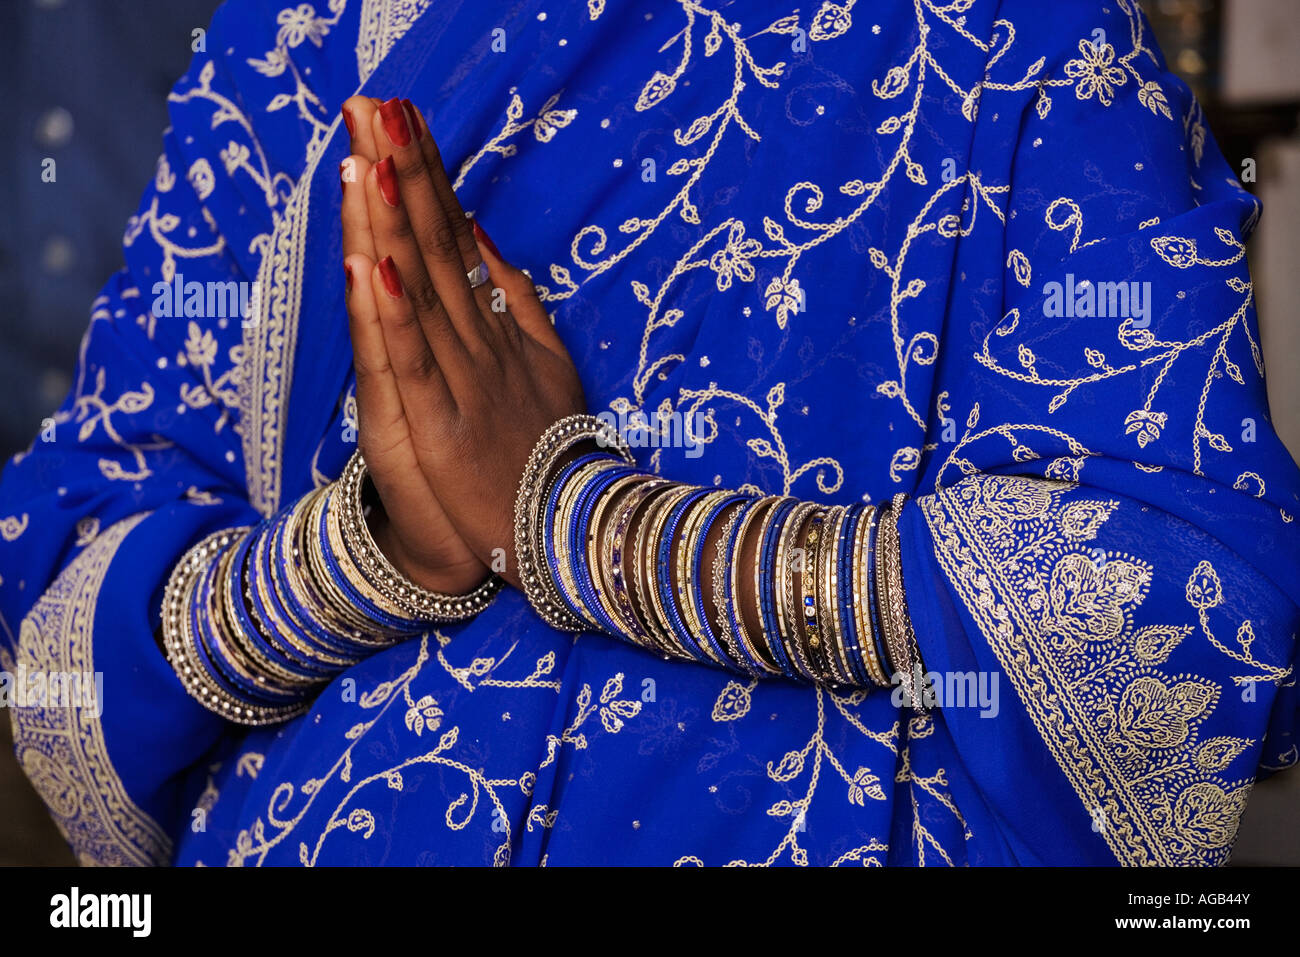 Indian woman in beautifully decorated sari with an assortment of bangles on her wrists She is performing the Namaskar gesture Stock Photo